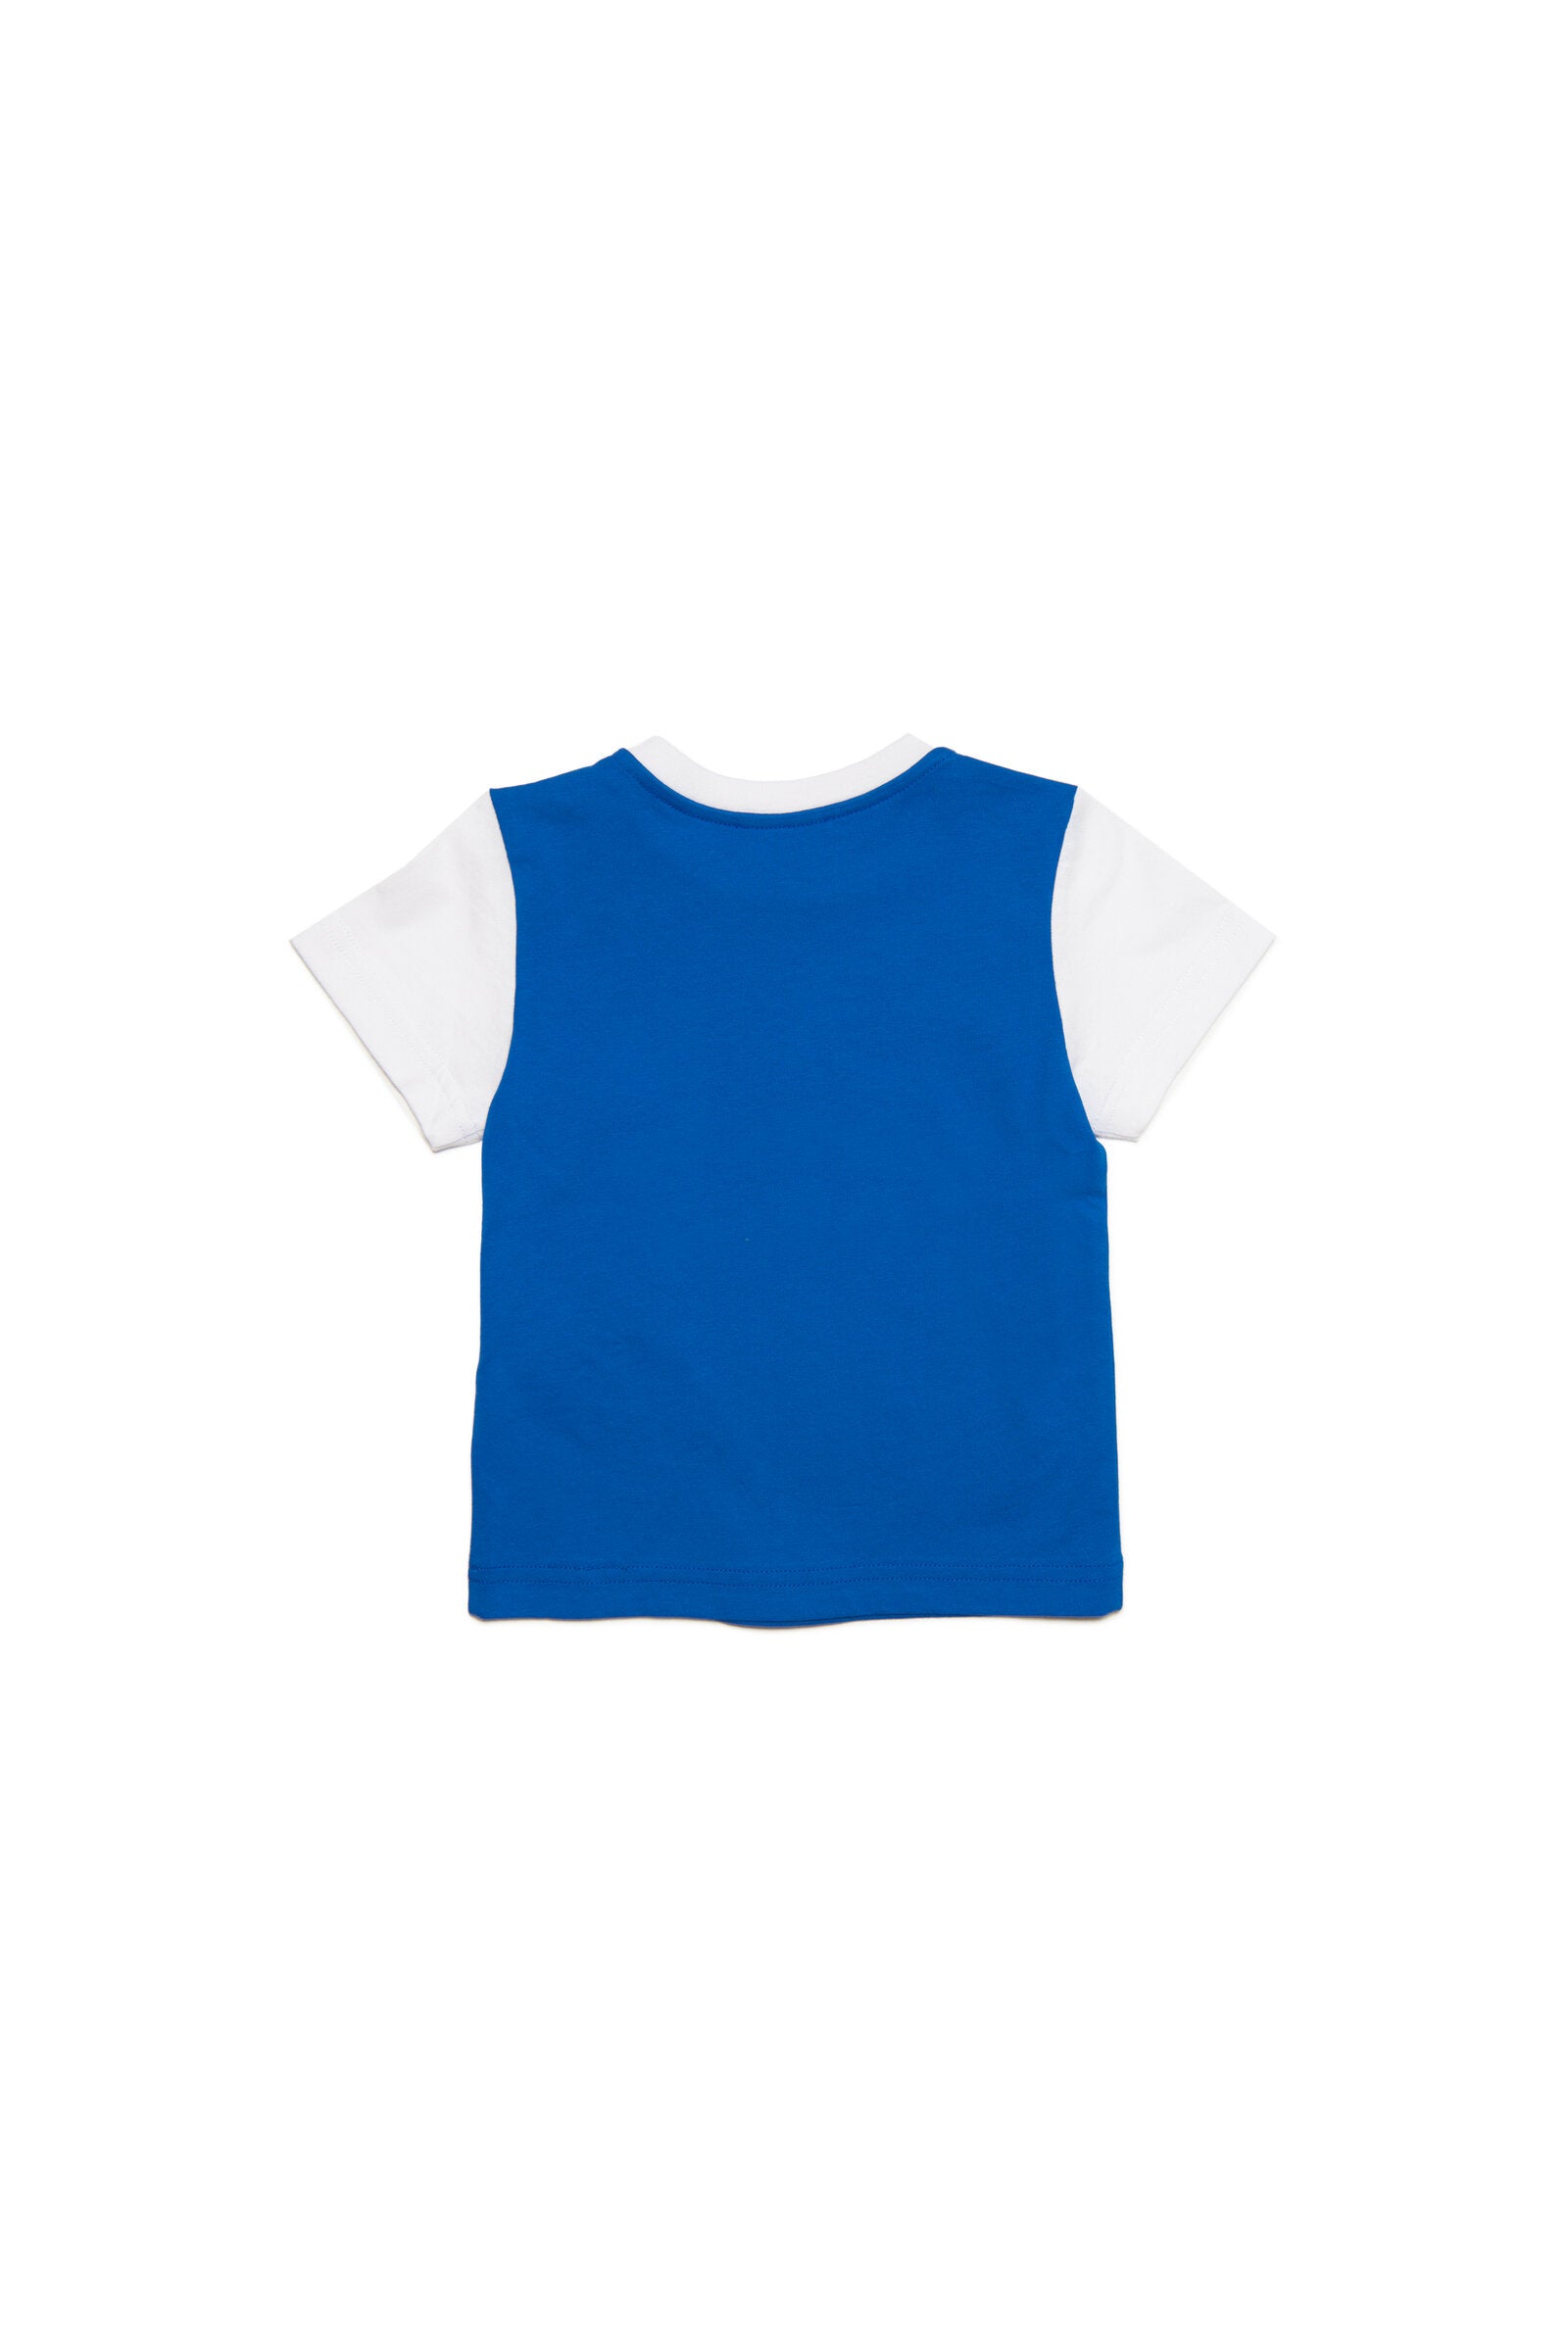 Blue cotton T-shirt with contrasting sleeves and collar